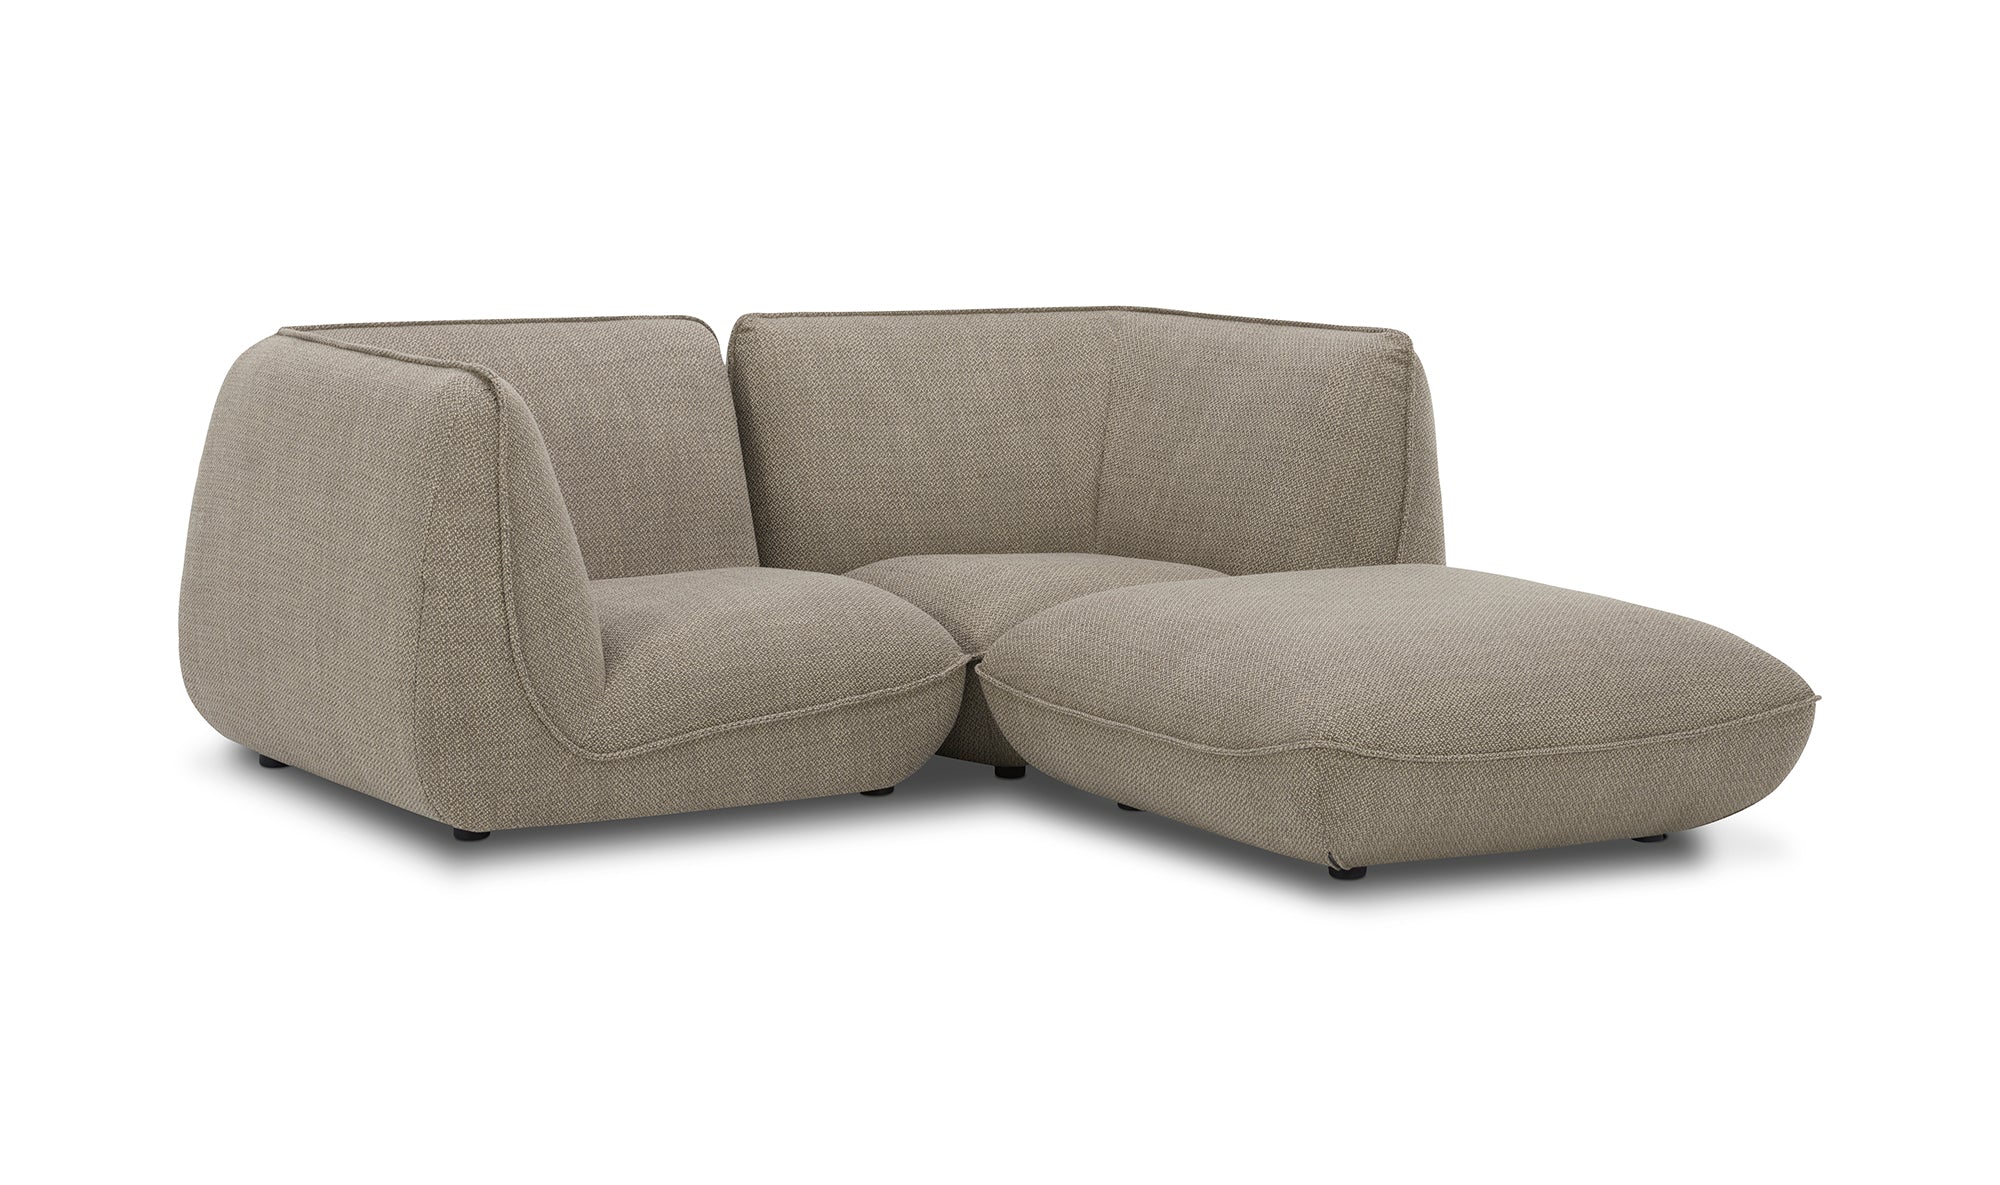 Zeppelin Modular Sectional - Speckled Pumice